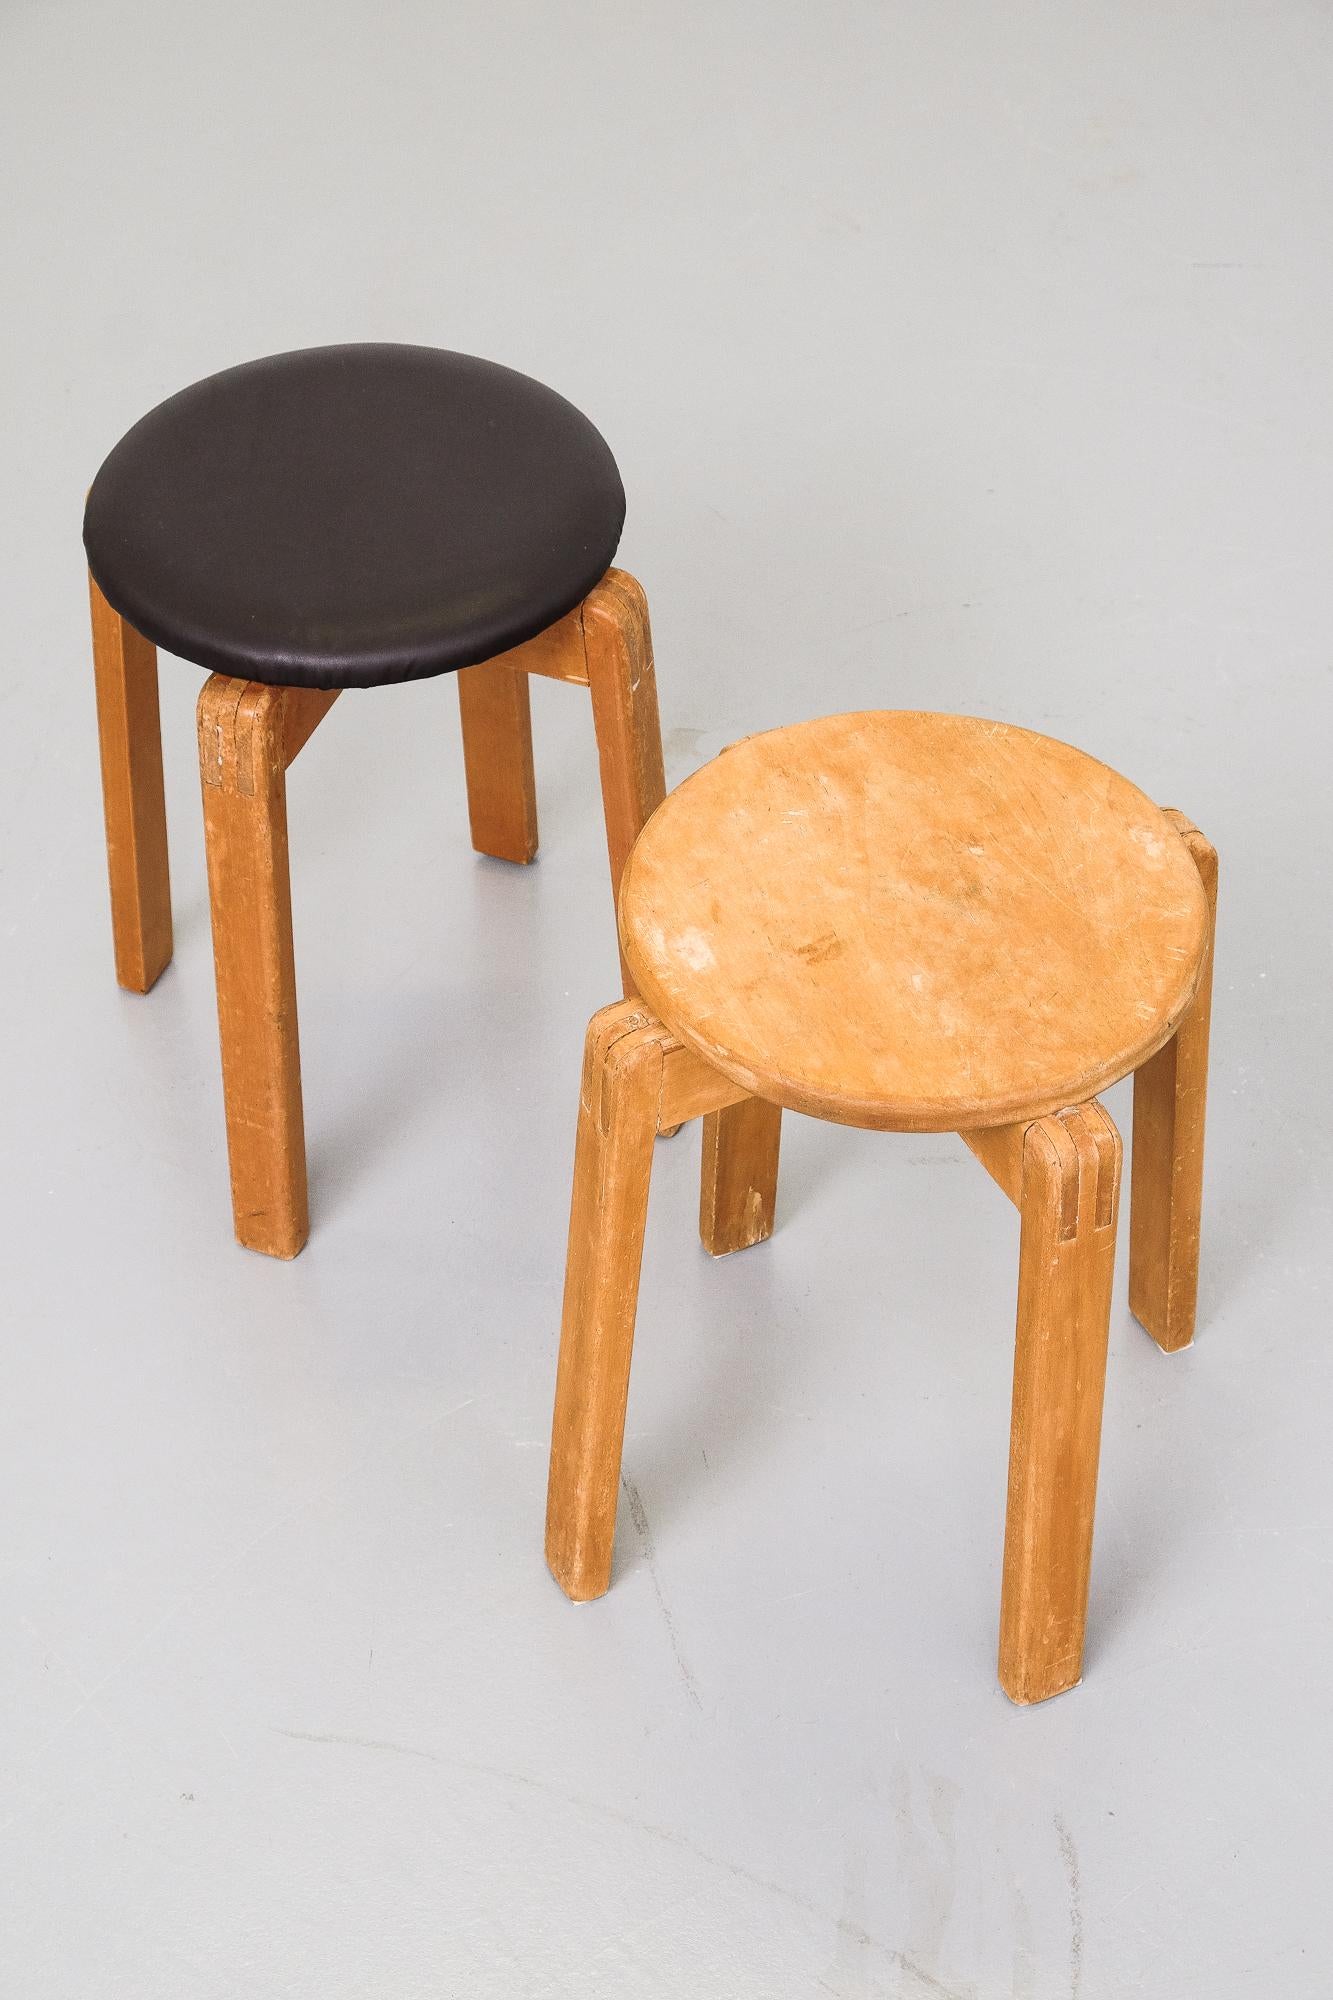 A pair of nicely patinated 1950s Finnish wooden stools. One with original patina on seat and the other with new dark brown leather upholstery.

Designer unknown.